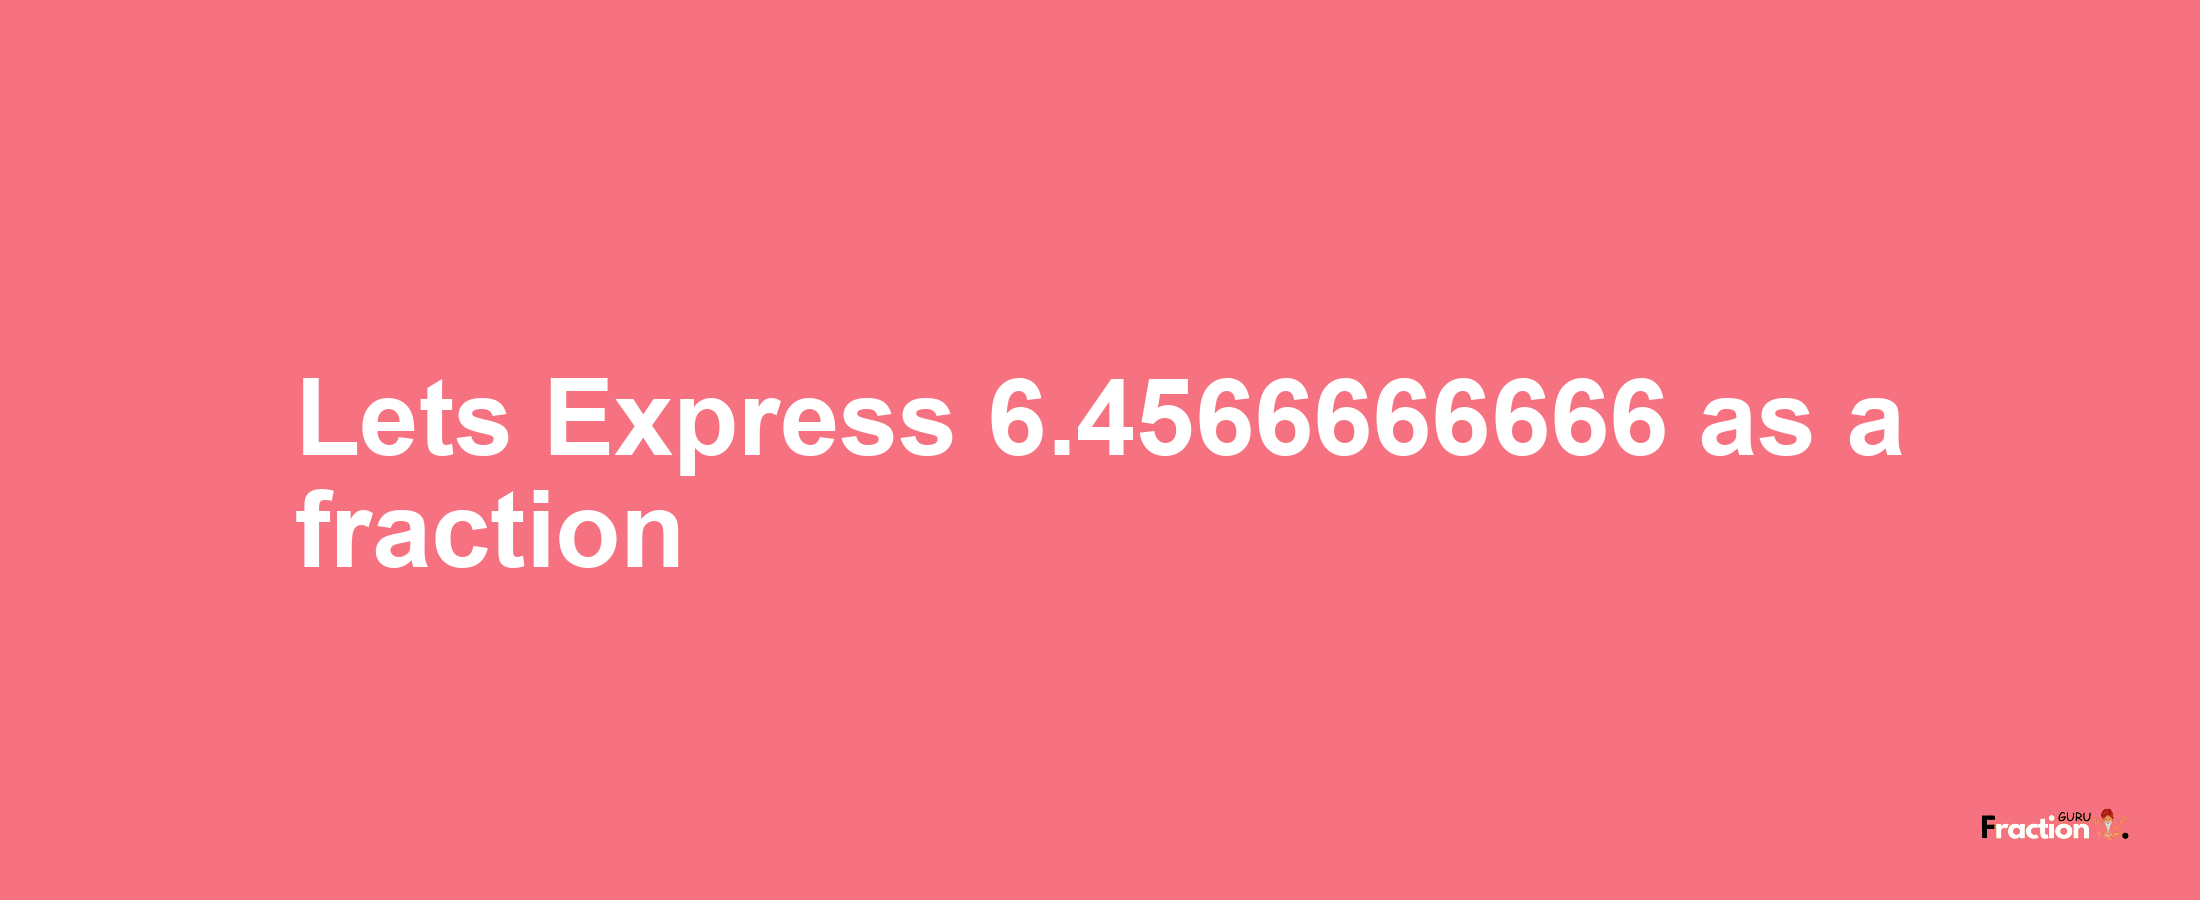 Lets Express 6.4566666666 as afraction